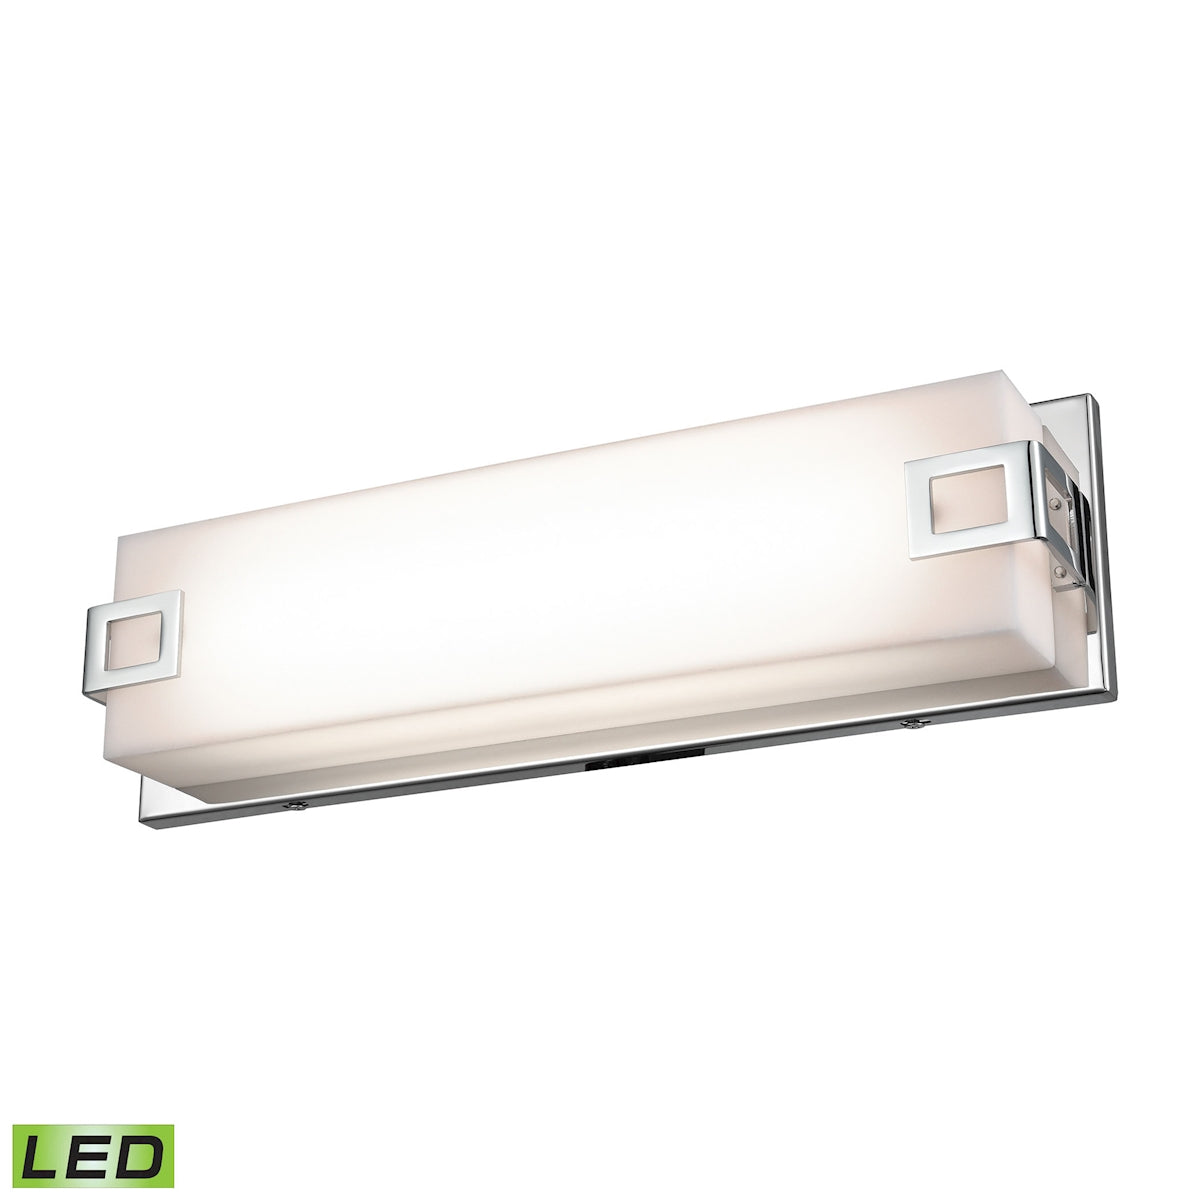 ELK Lighting WSL2125-AC-15 Prospect 1-Light Vanity Sconce in Chrome with White Acrylic Diffuser